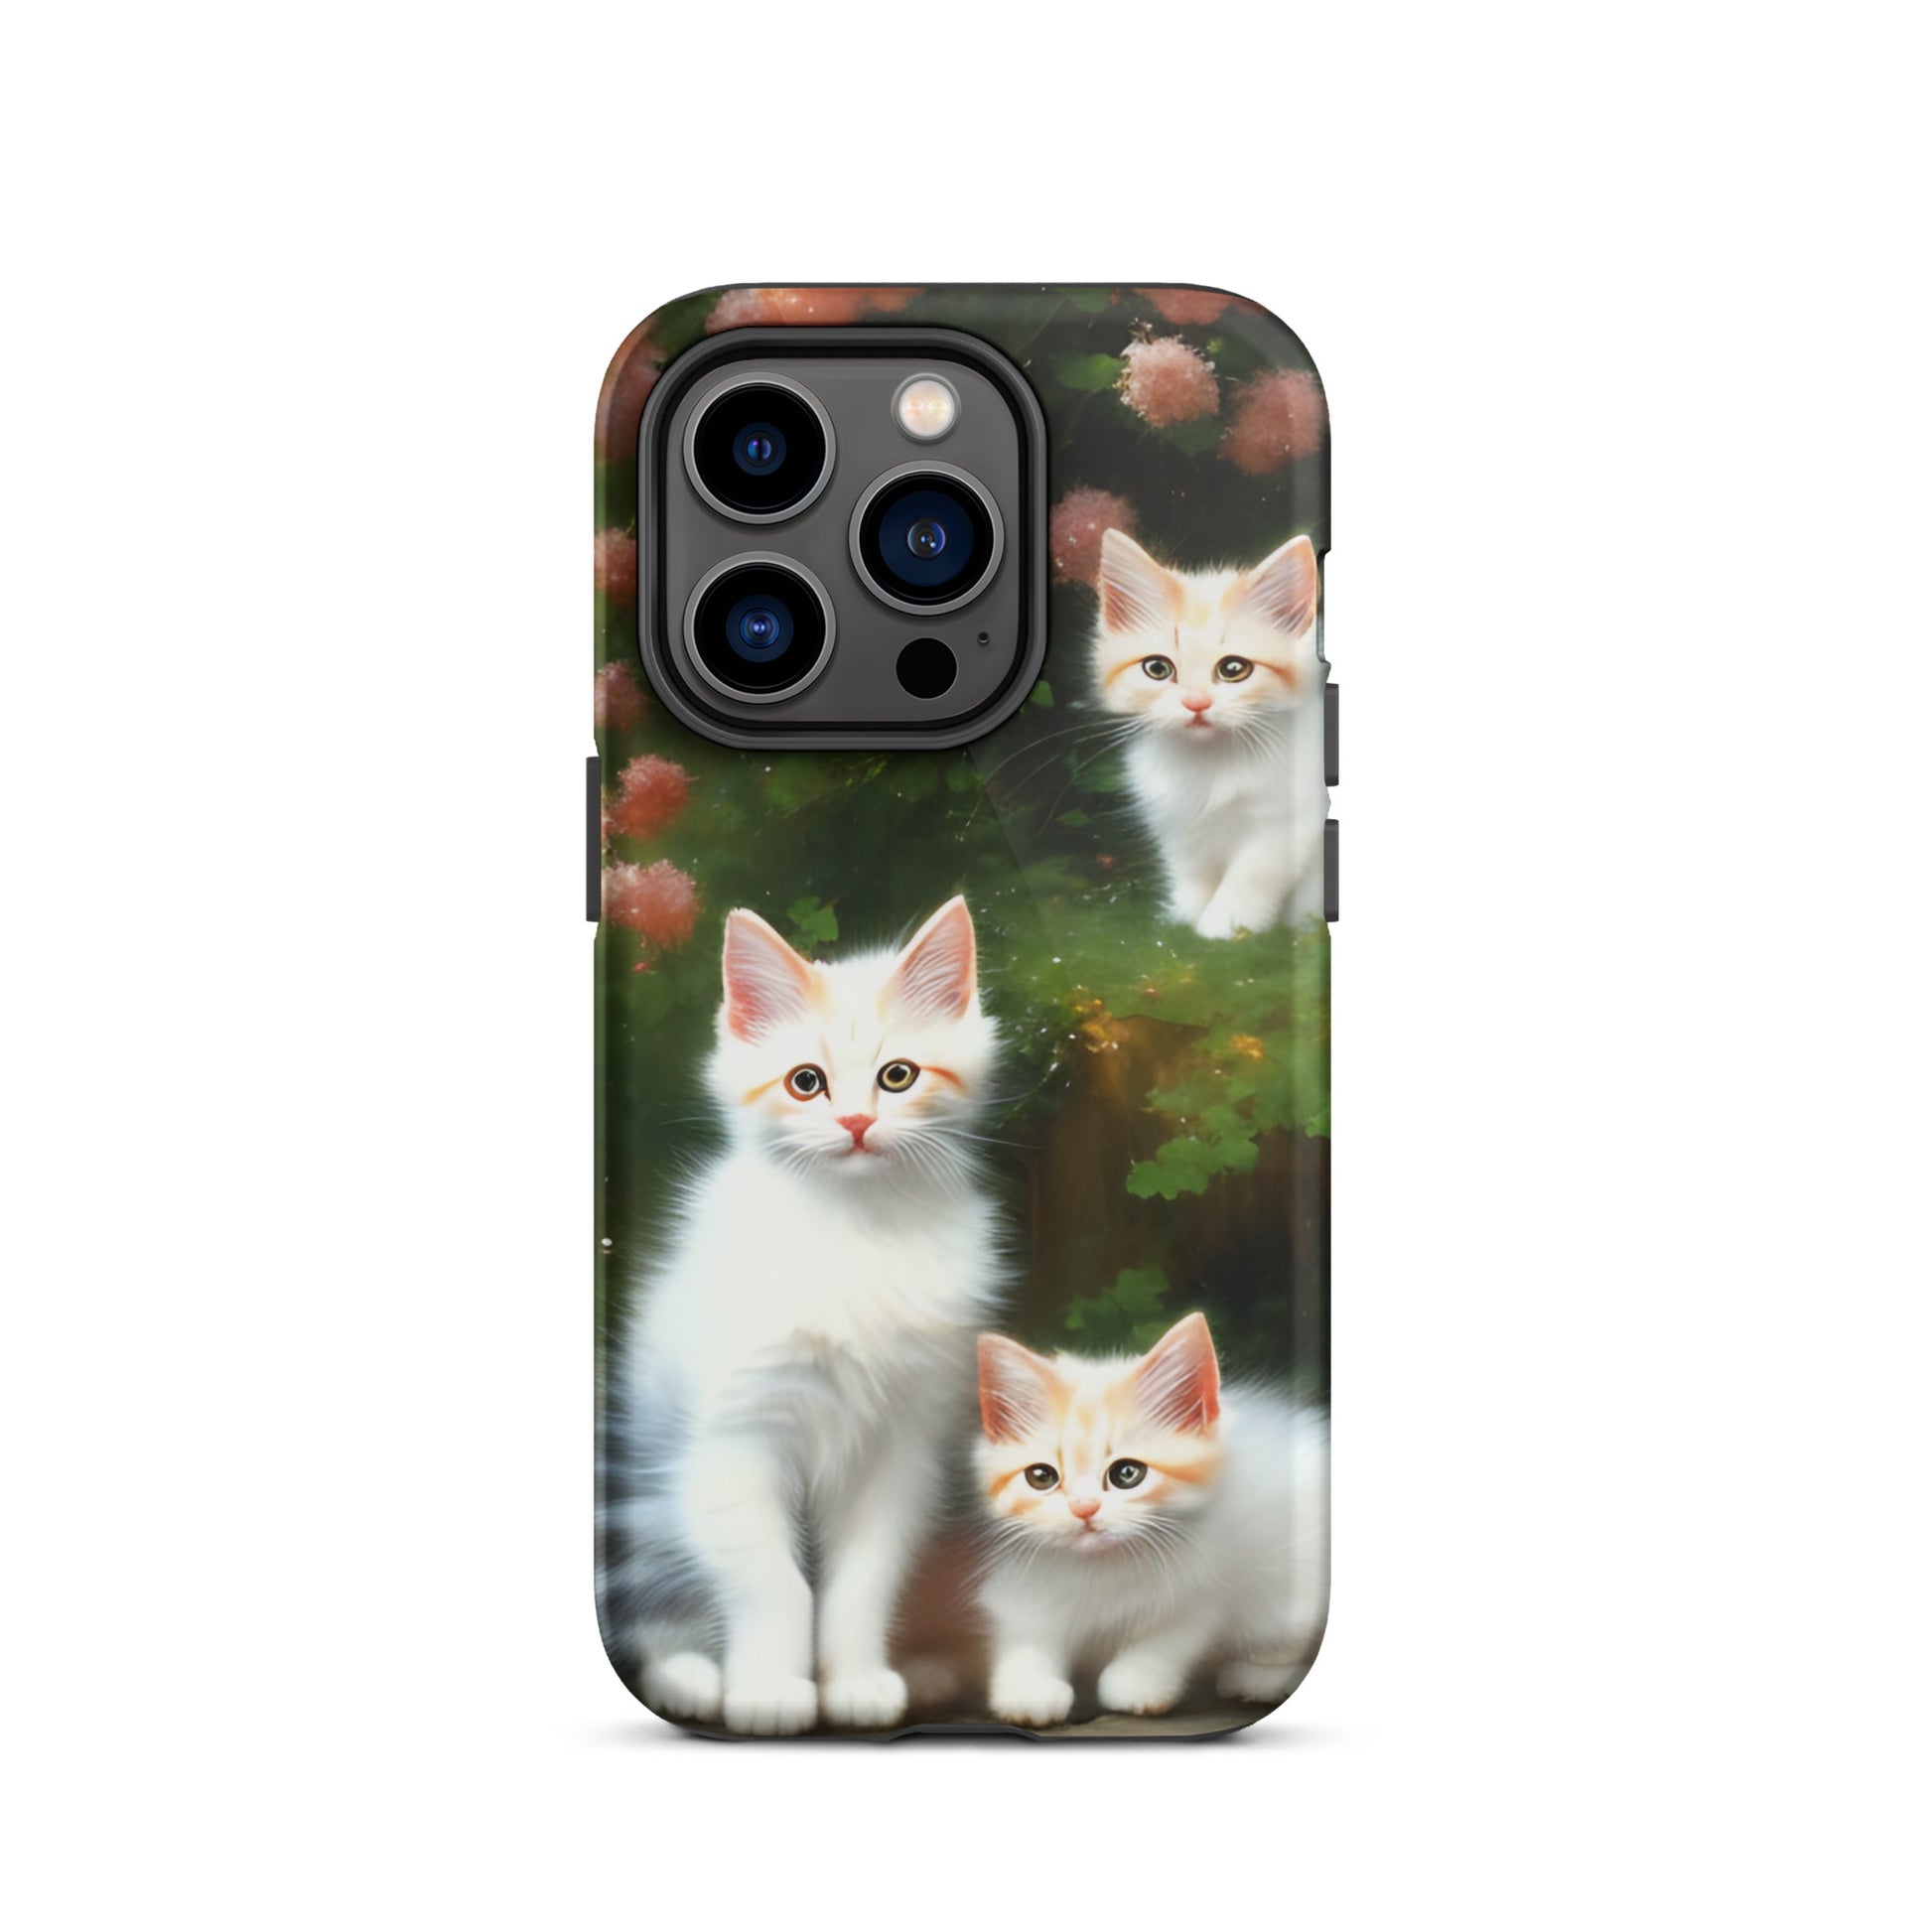 A picture of a iphone tough case with 3 fluffy white and orange kittens and peach colored flowers in the background - glossy-iphone-14-pro-front